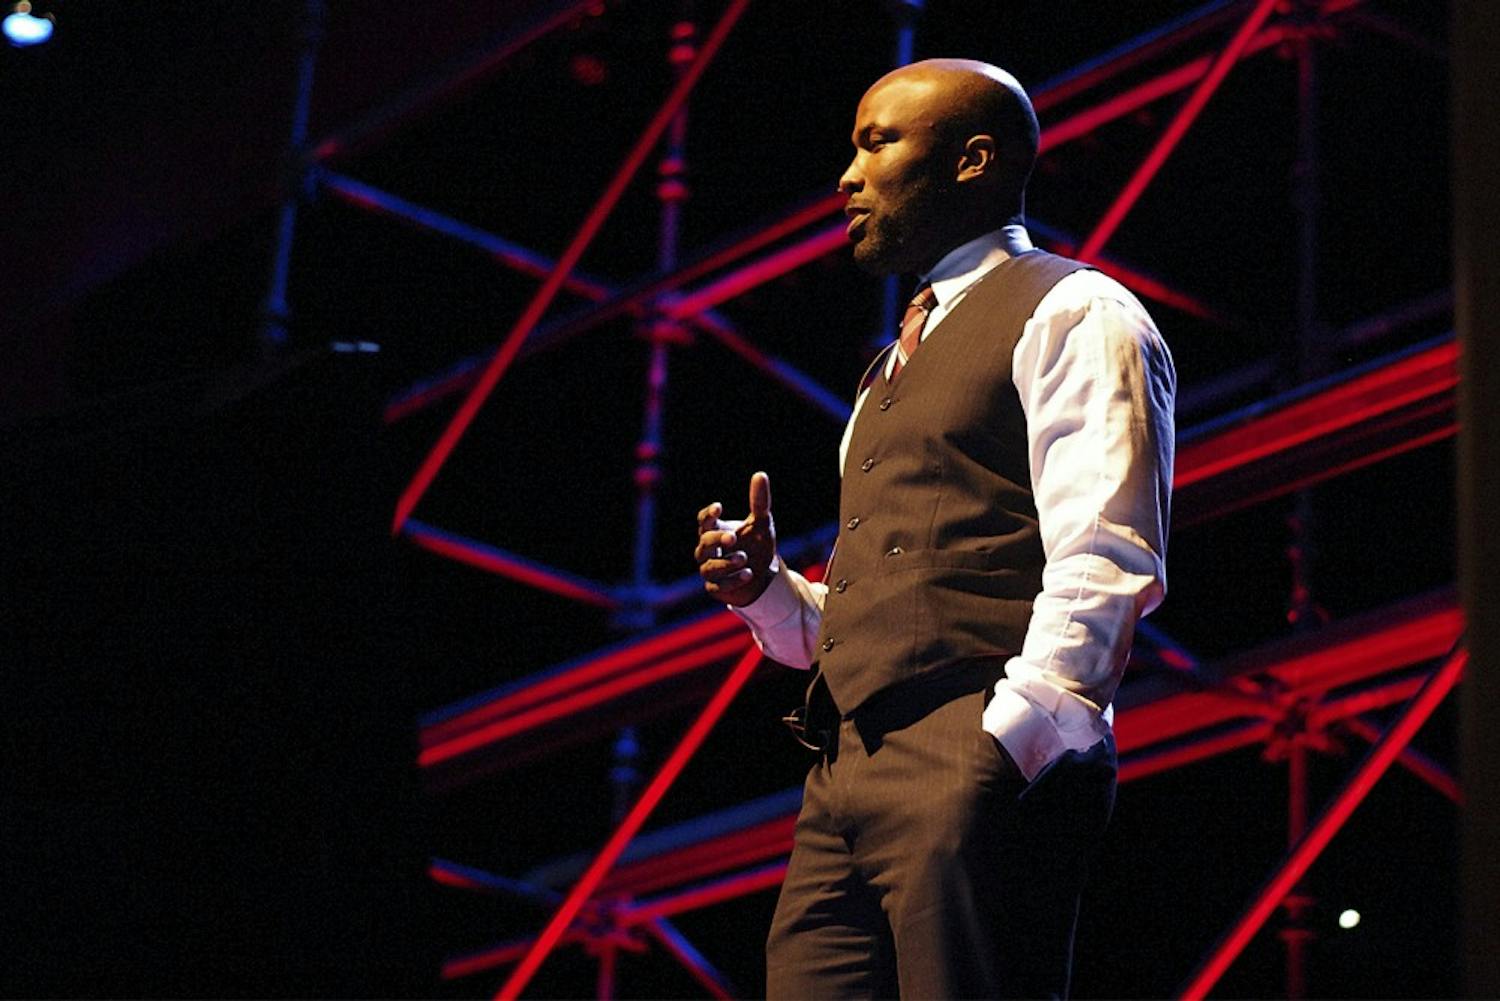 Venroy July, an attorney and boxer from New York, speaks at last year’s TedxUNC at Memorial Hall. This year’s conference will be held on Feb. 27.